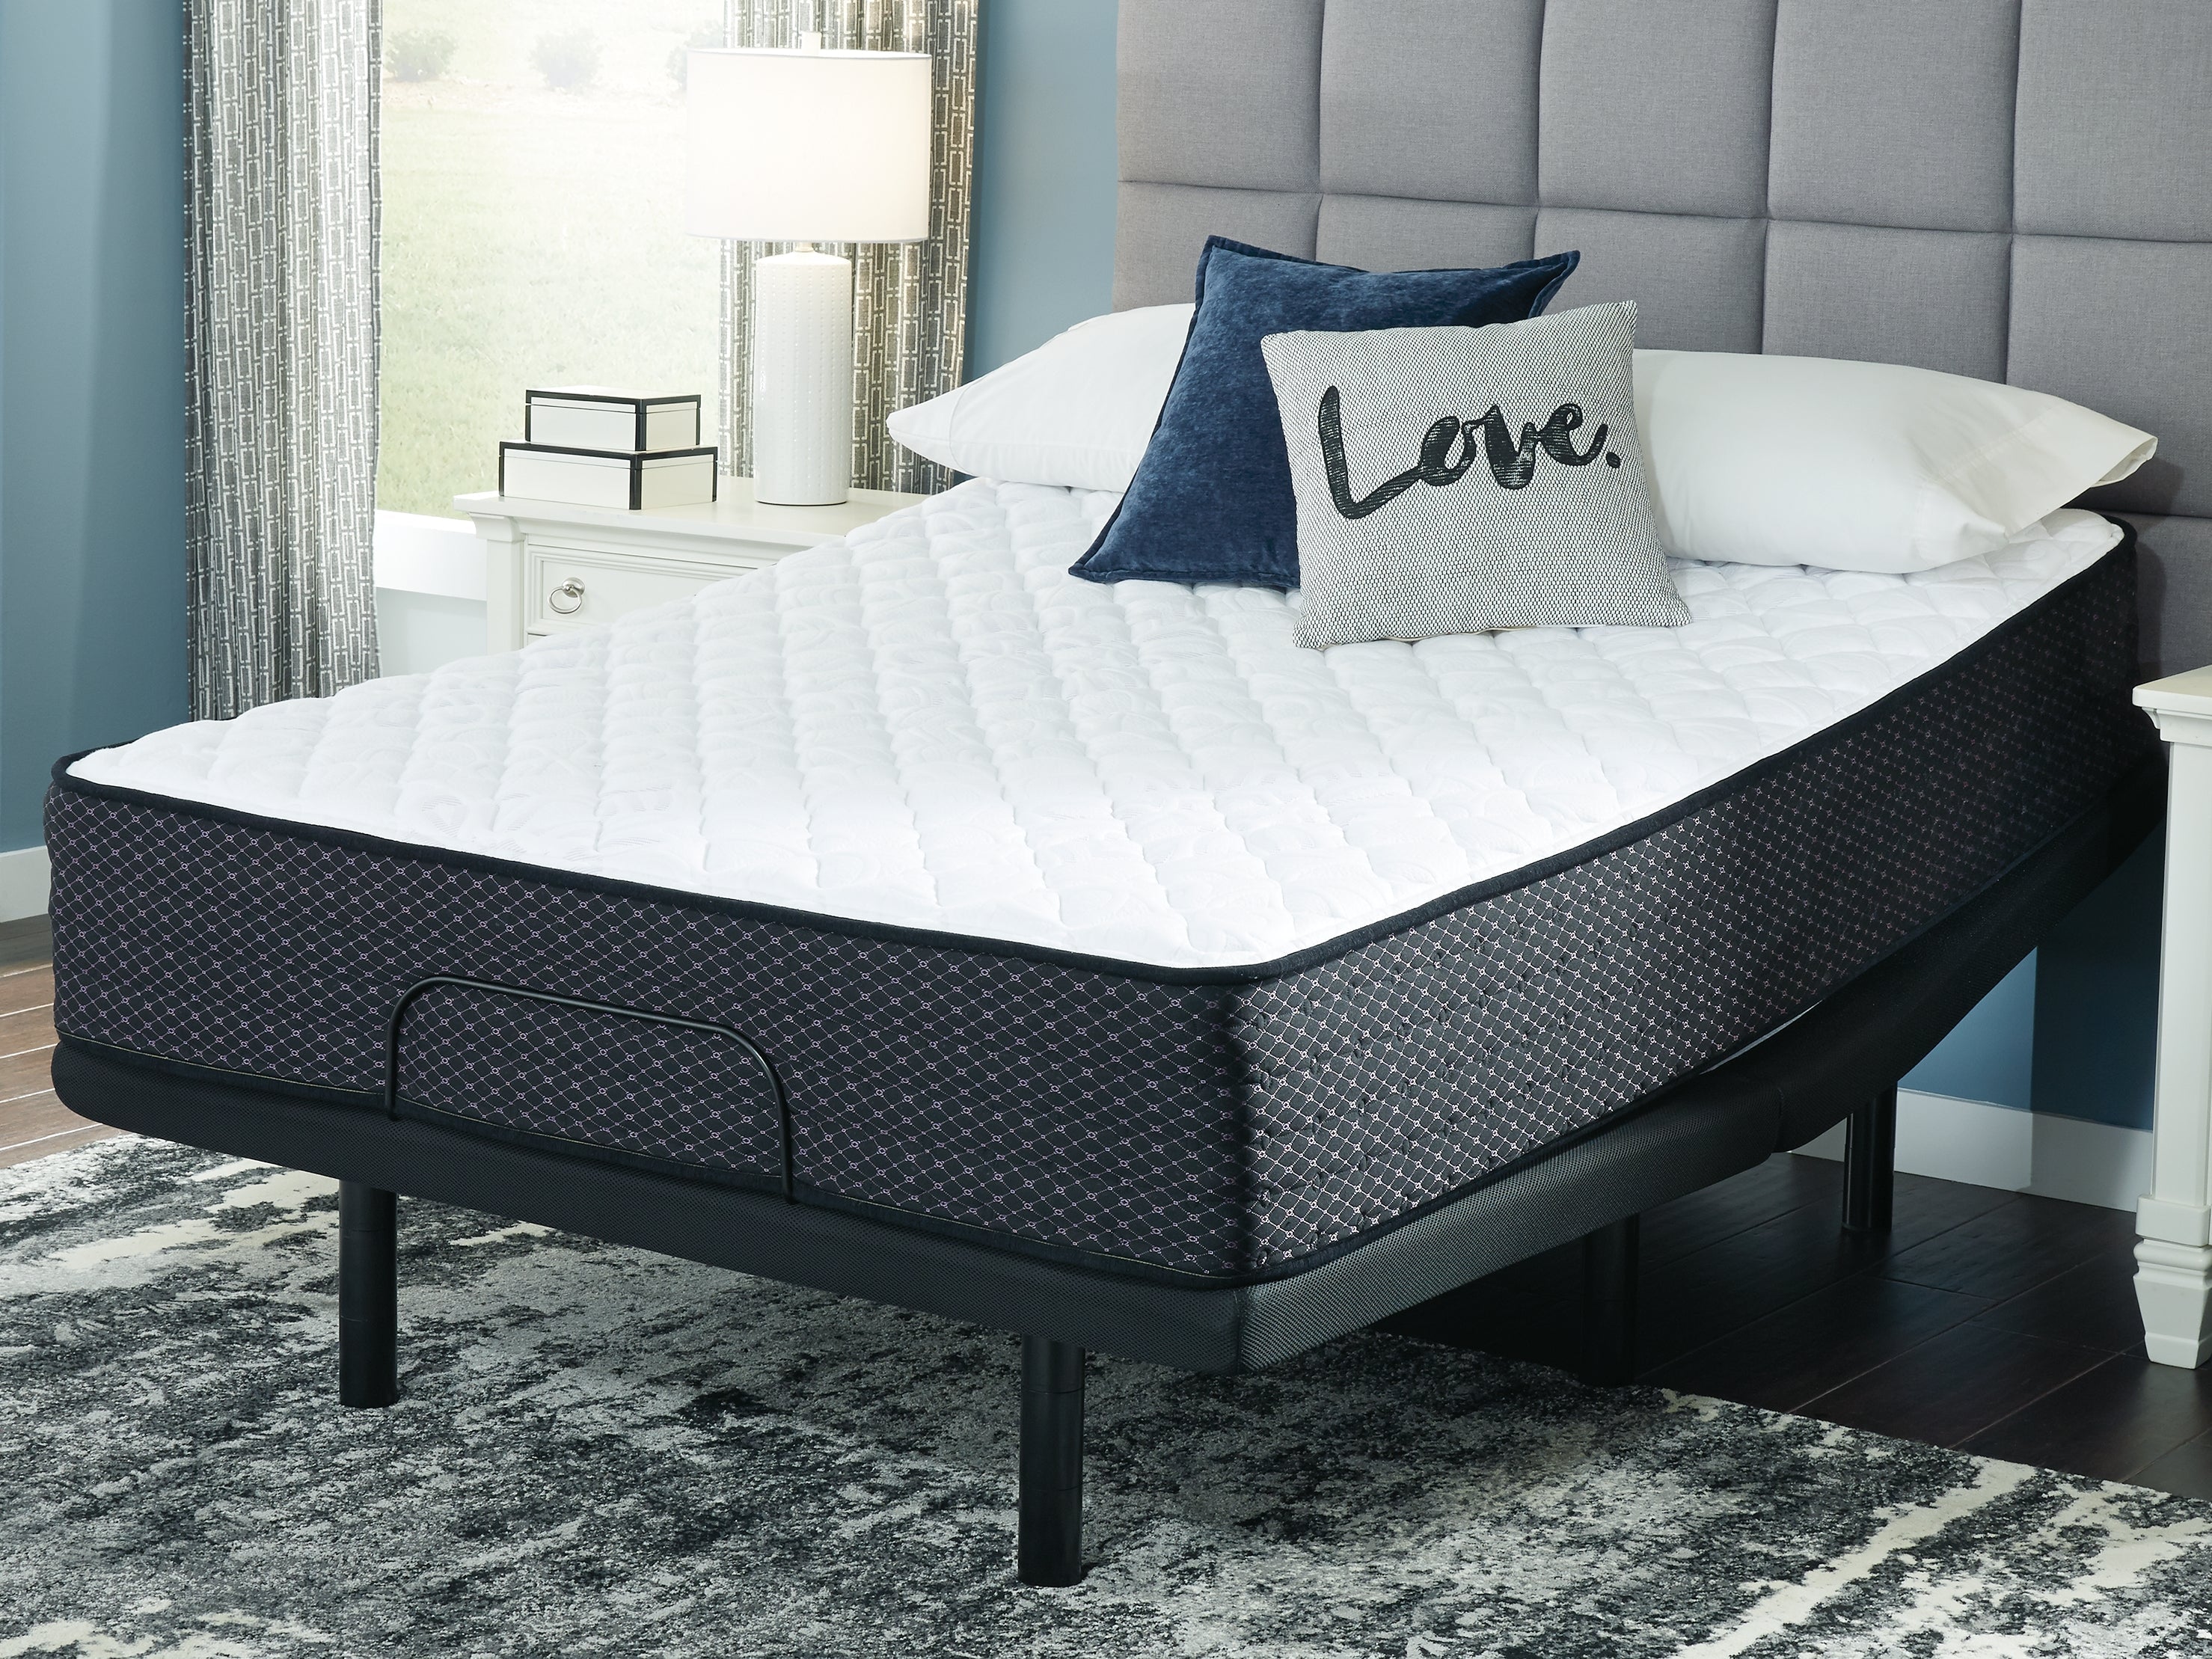 Anniversary Edition Firm King Mattress with Head-Foot Model Best King Adjustable Base - furniture place usa